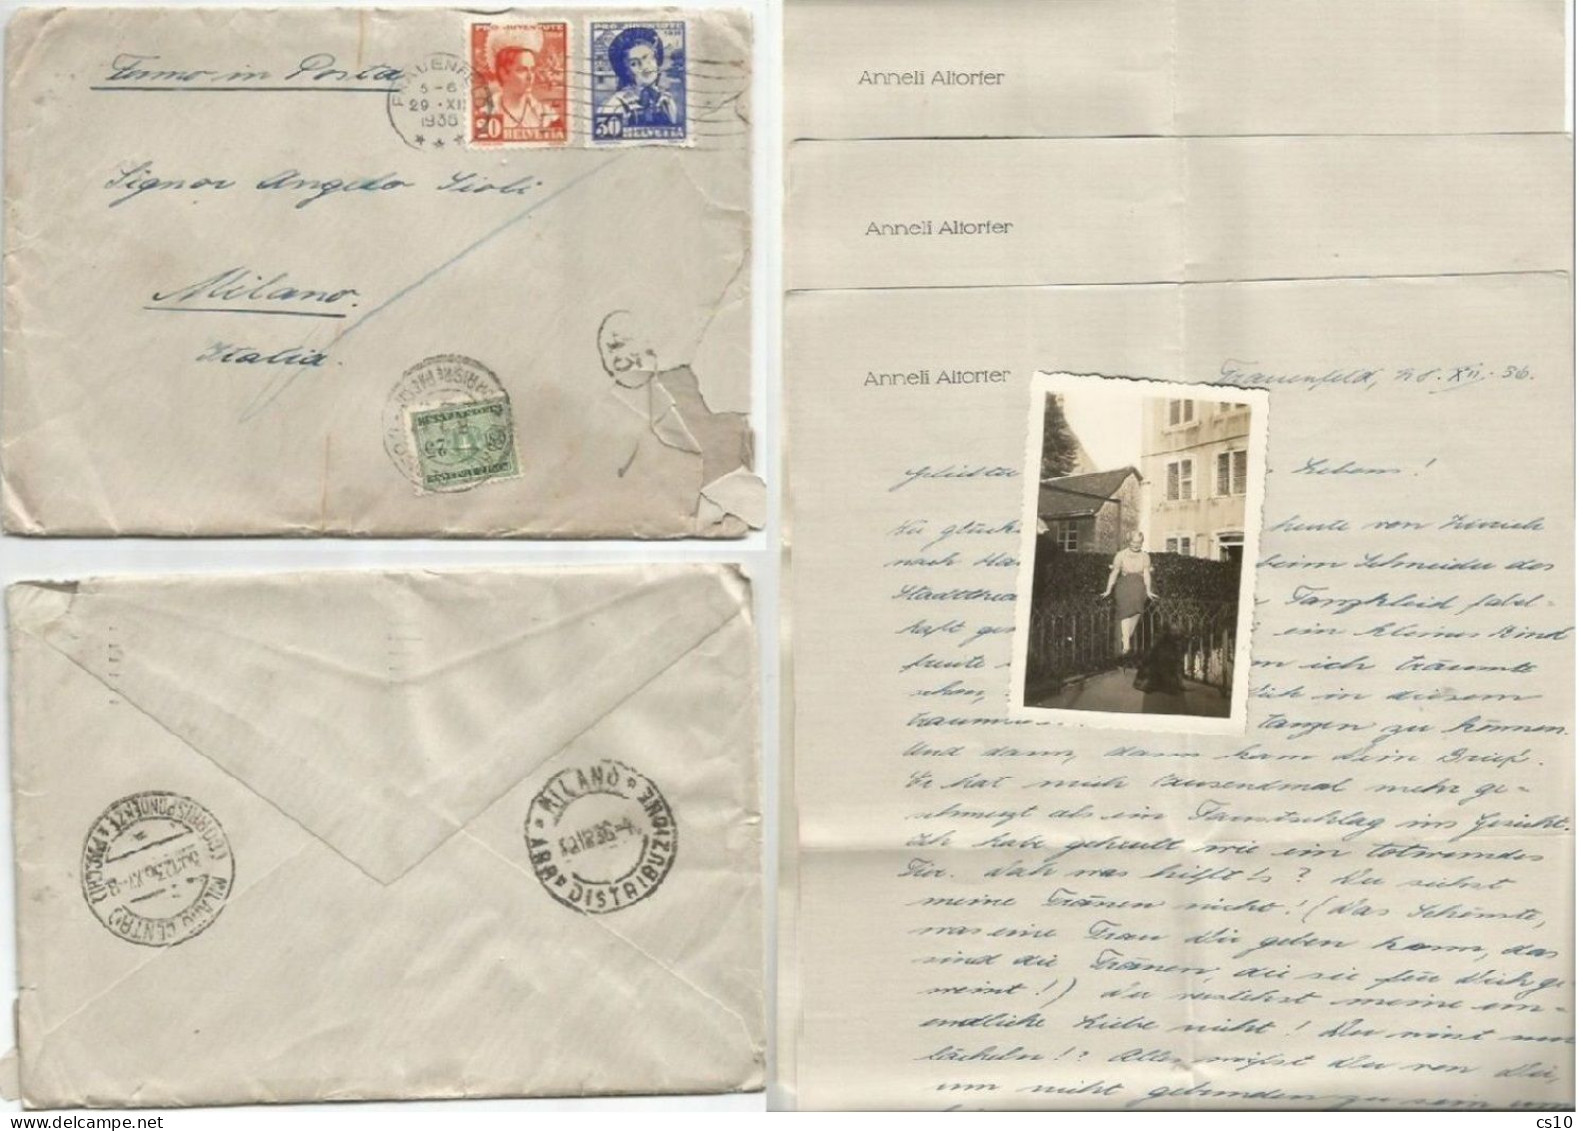 Suisse Frauenfeld 29dec1936 To Italy Fermo Posta Poste Restante With 2v PJ 1936 Taxed P.Due + Photo + 3 Pages Text - Strafportzegels